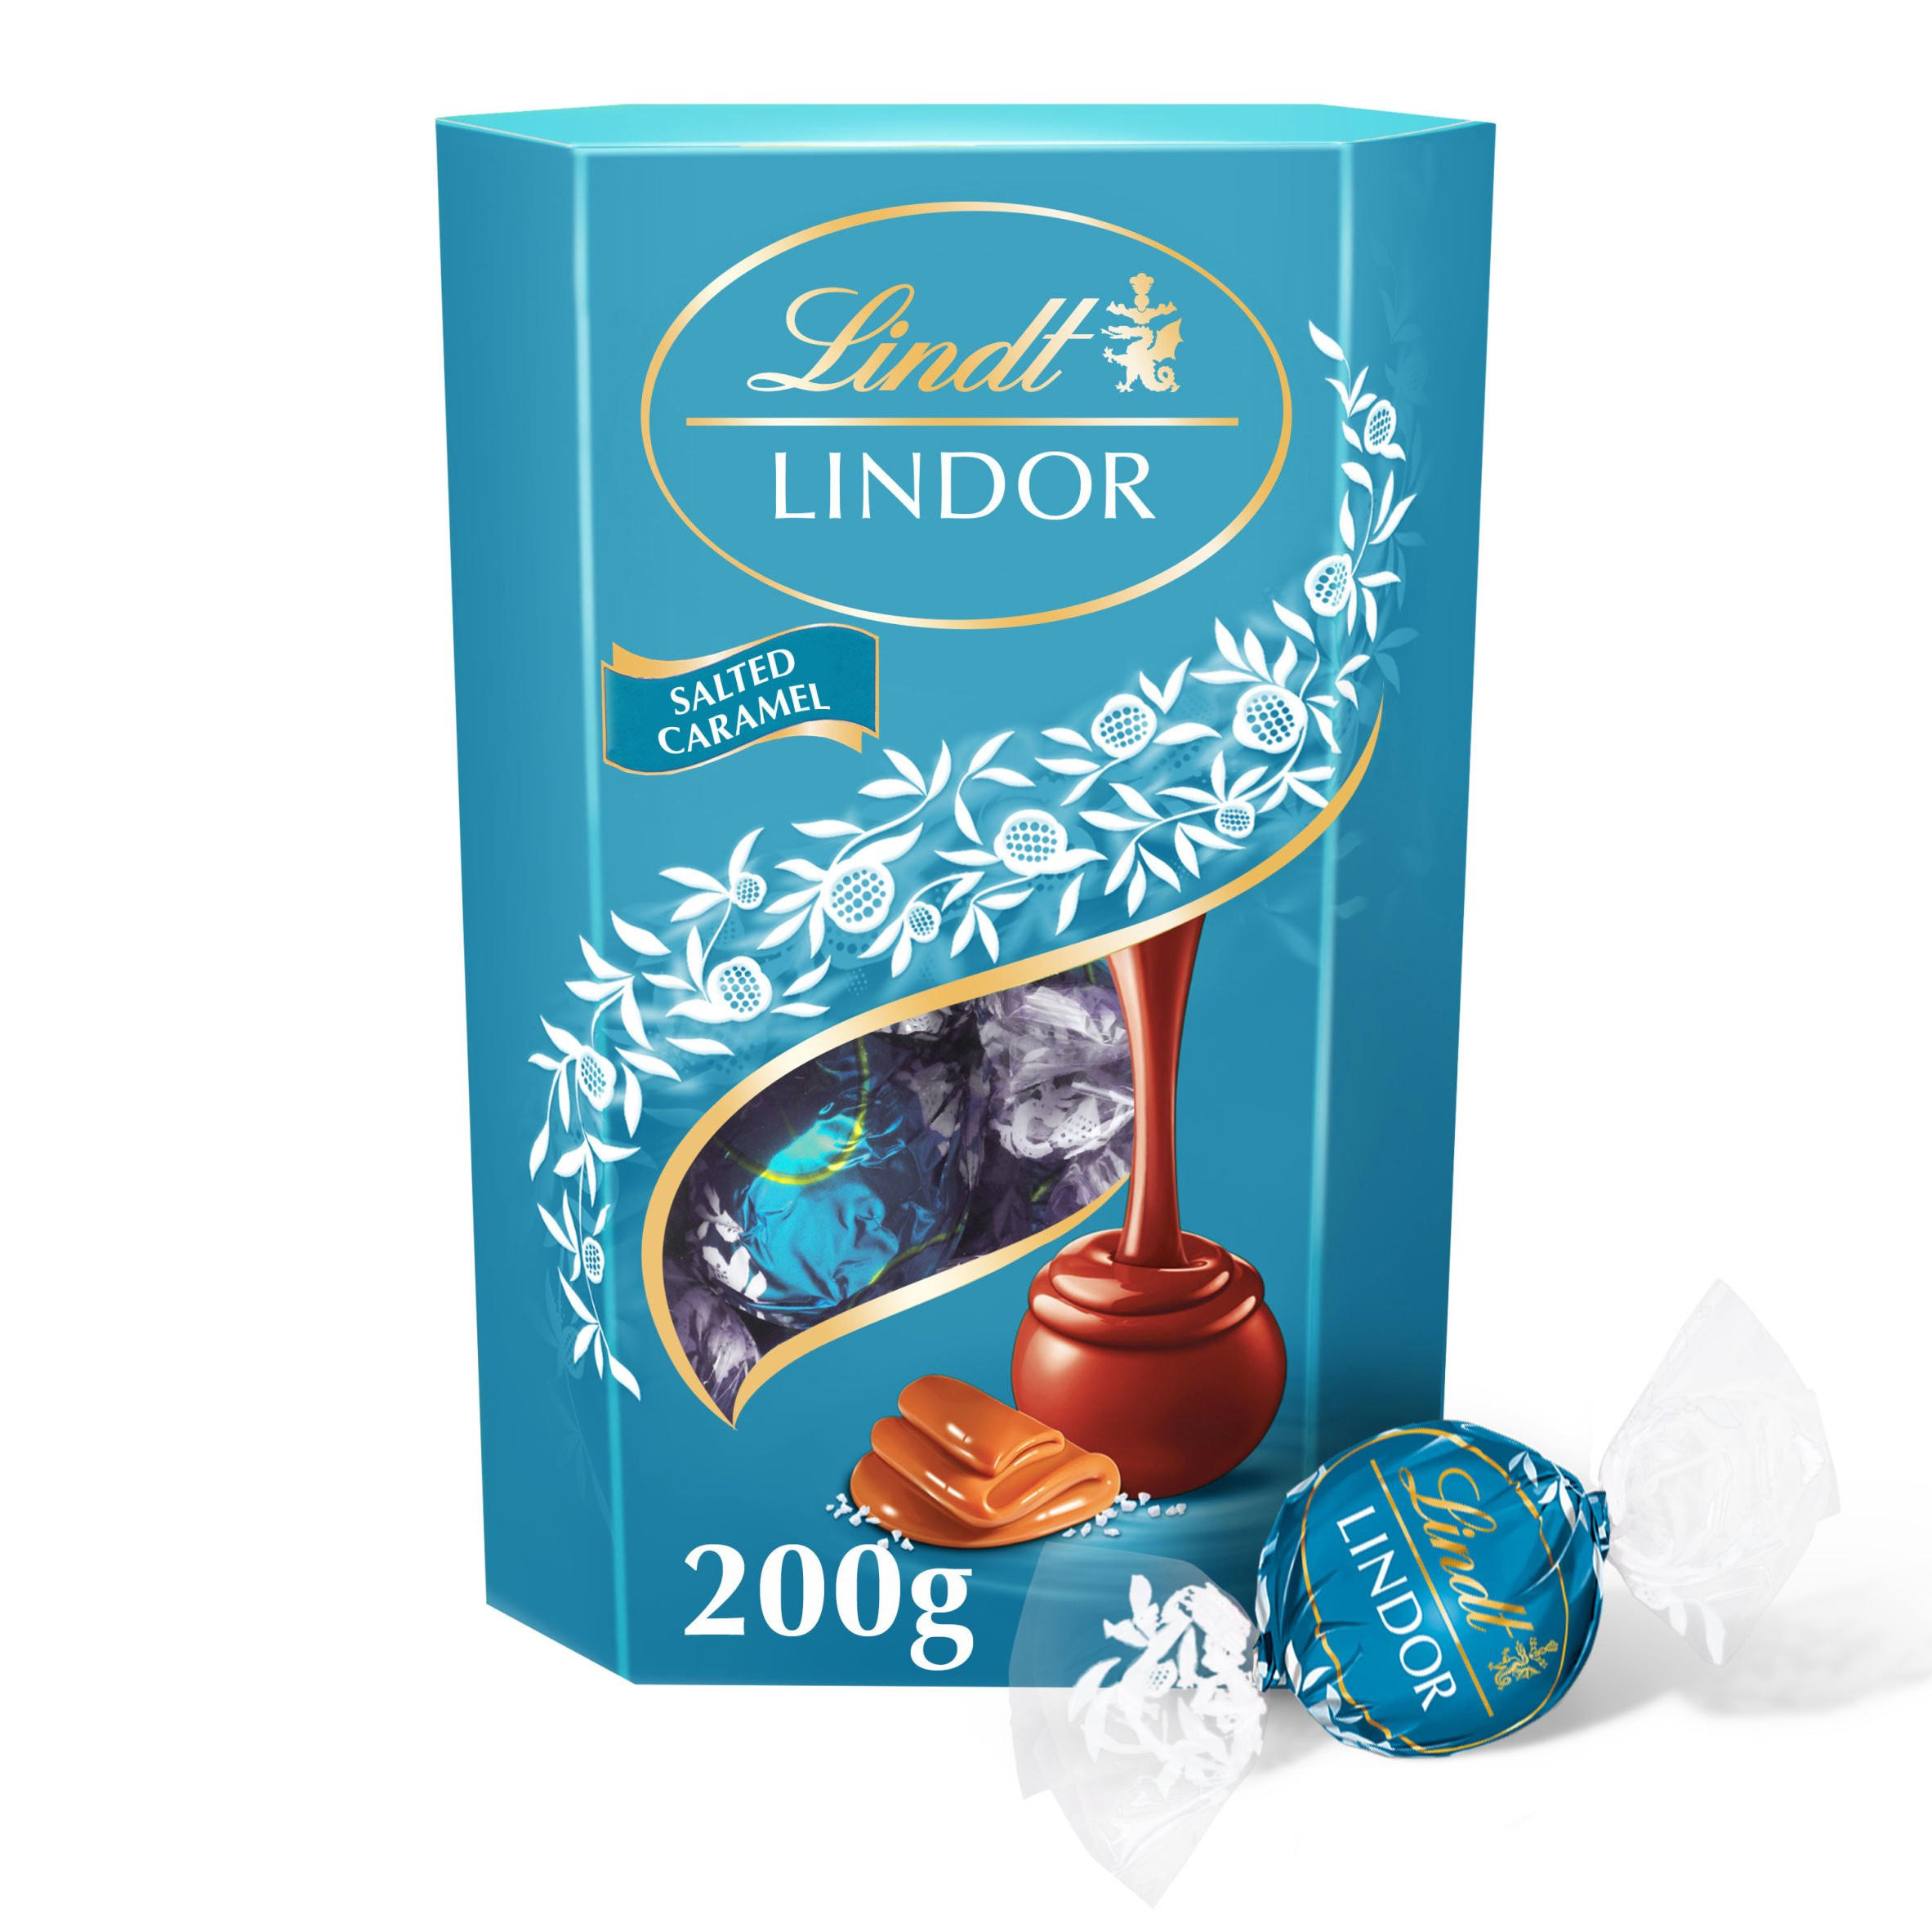 Lindt Lindor Salted Caramel Chocolate Truffles Box 200g Sharing Bags And Tubs Iceland Foods 1880